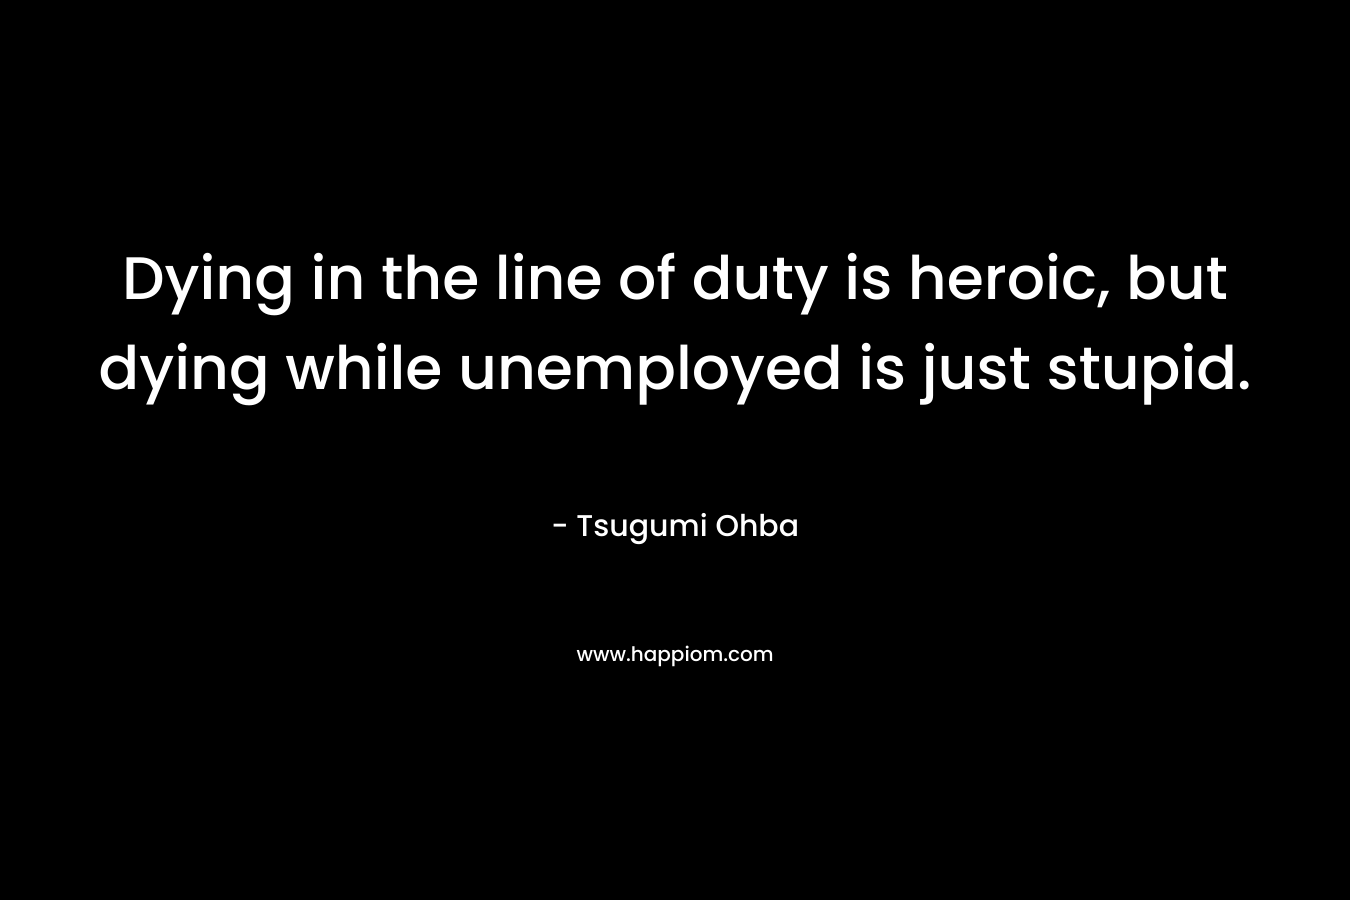 Dying in the line of duty is heroic, but dying while unemployed is just stupid. – Tsugumi Ohba